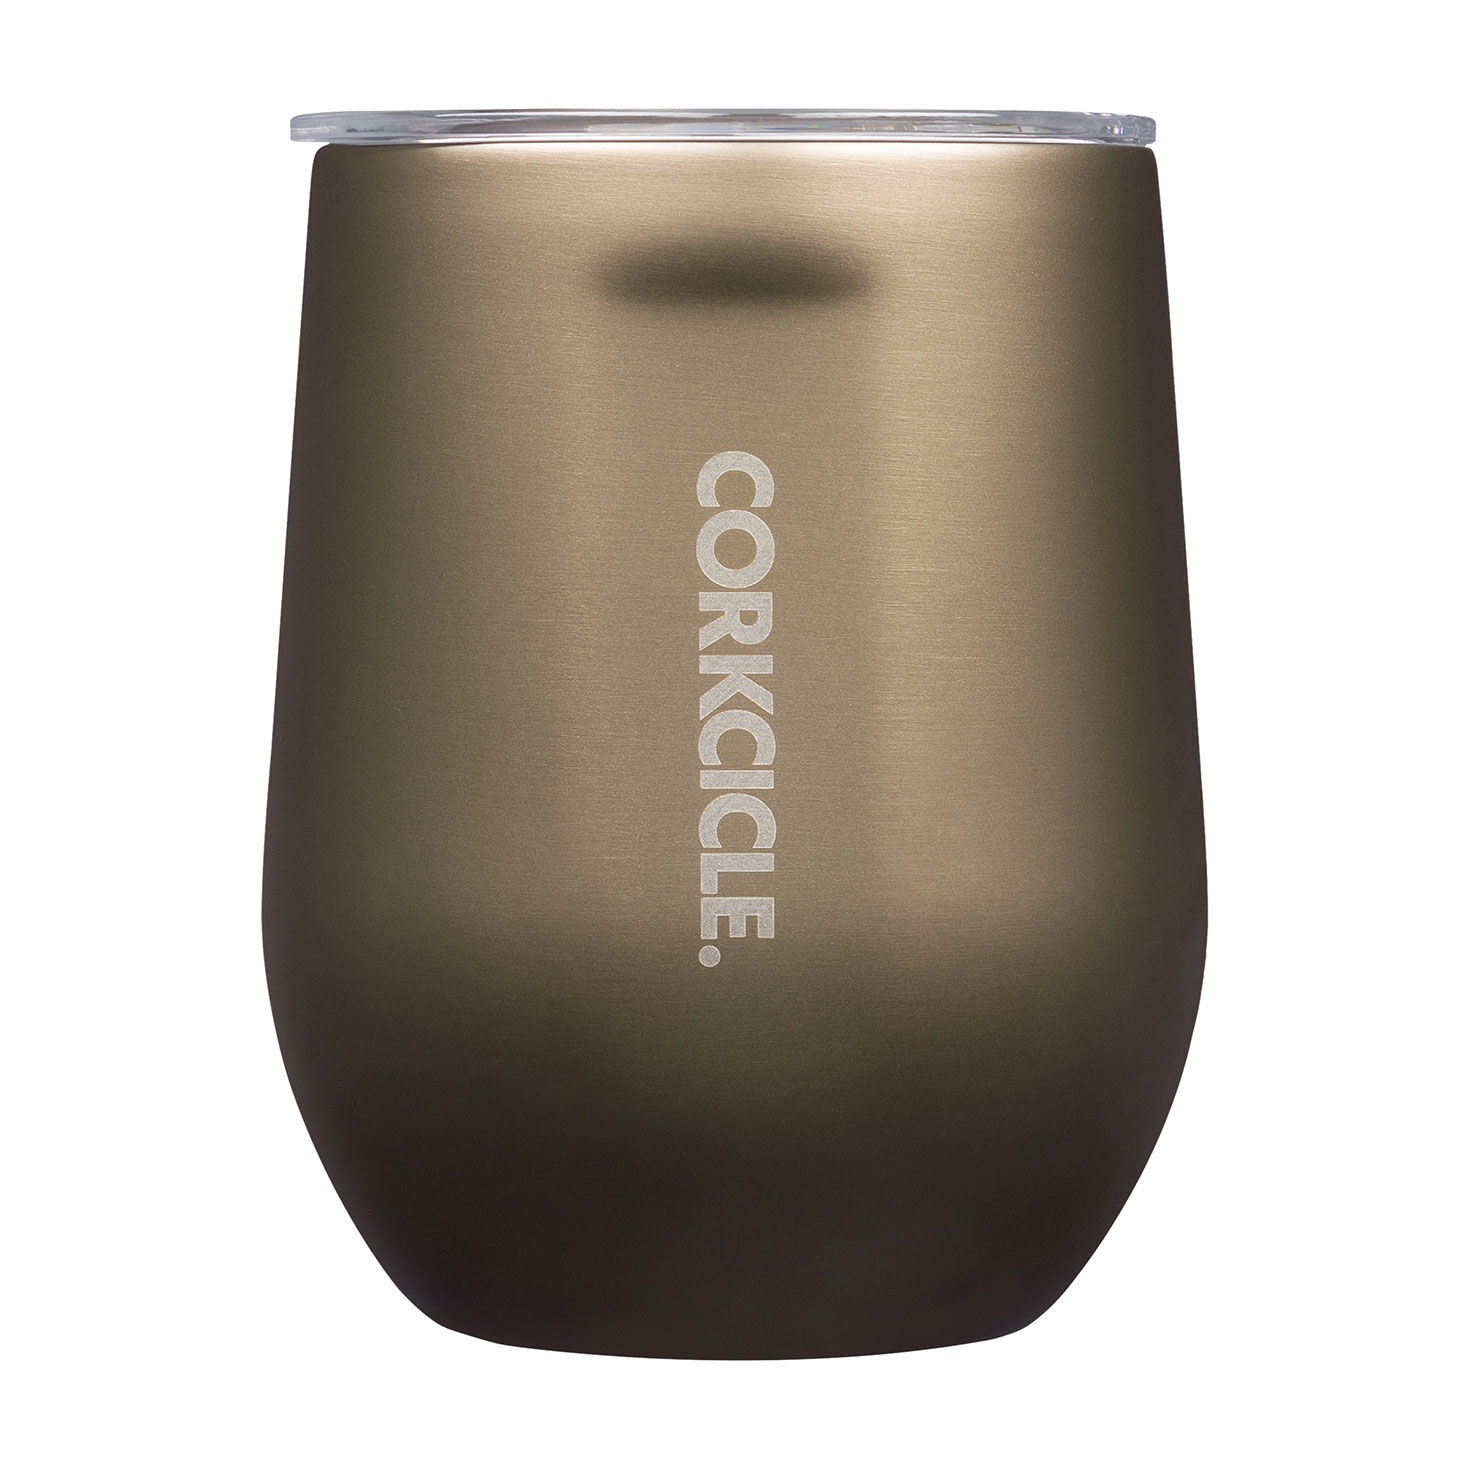 https://www.hallmark.com/dw/image/v2/AALB_PRD/on/demandware.static/-/Sites-hallmark-master/default/dwe3daadac/images/finished-goods/products/2312EPR/Prosecco-Stainless-Steel-Insulated-12oz.-Cup-With-Lid_2312EPR_01.jpg?sfrm=jpg